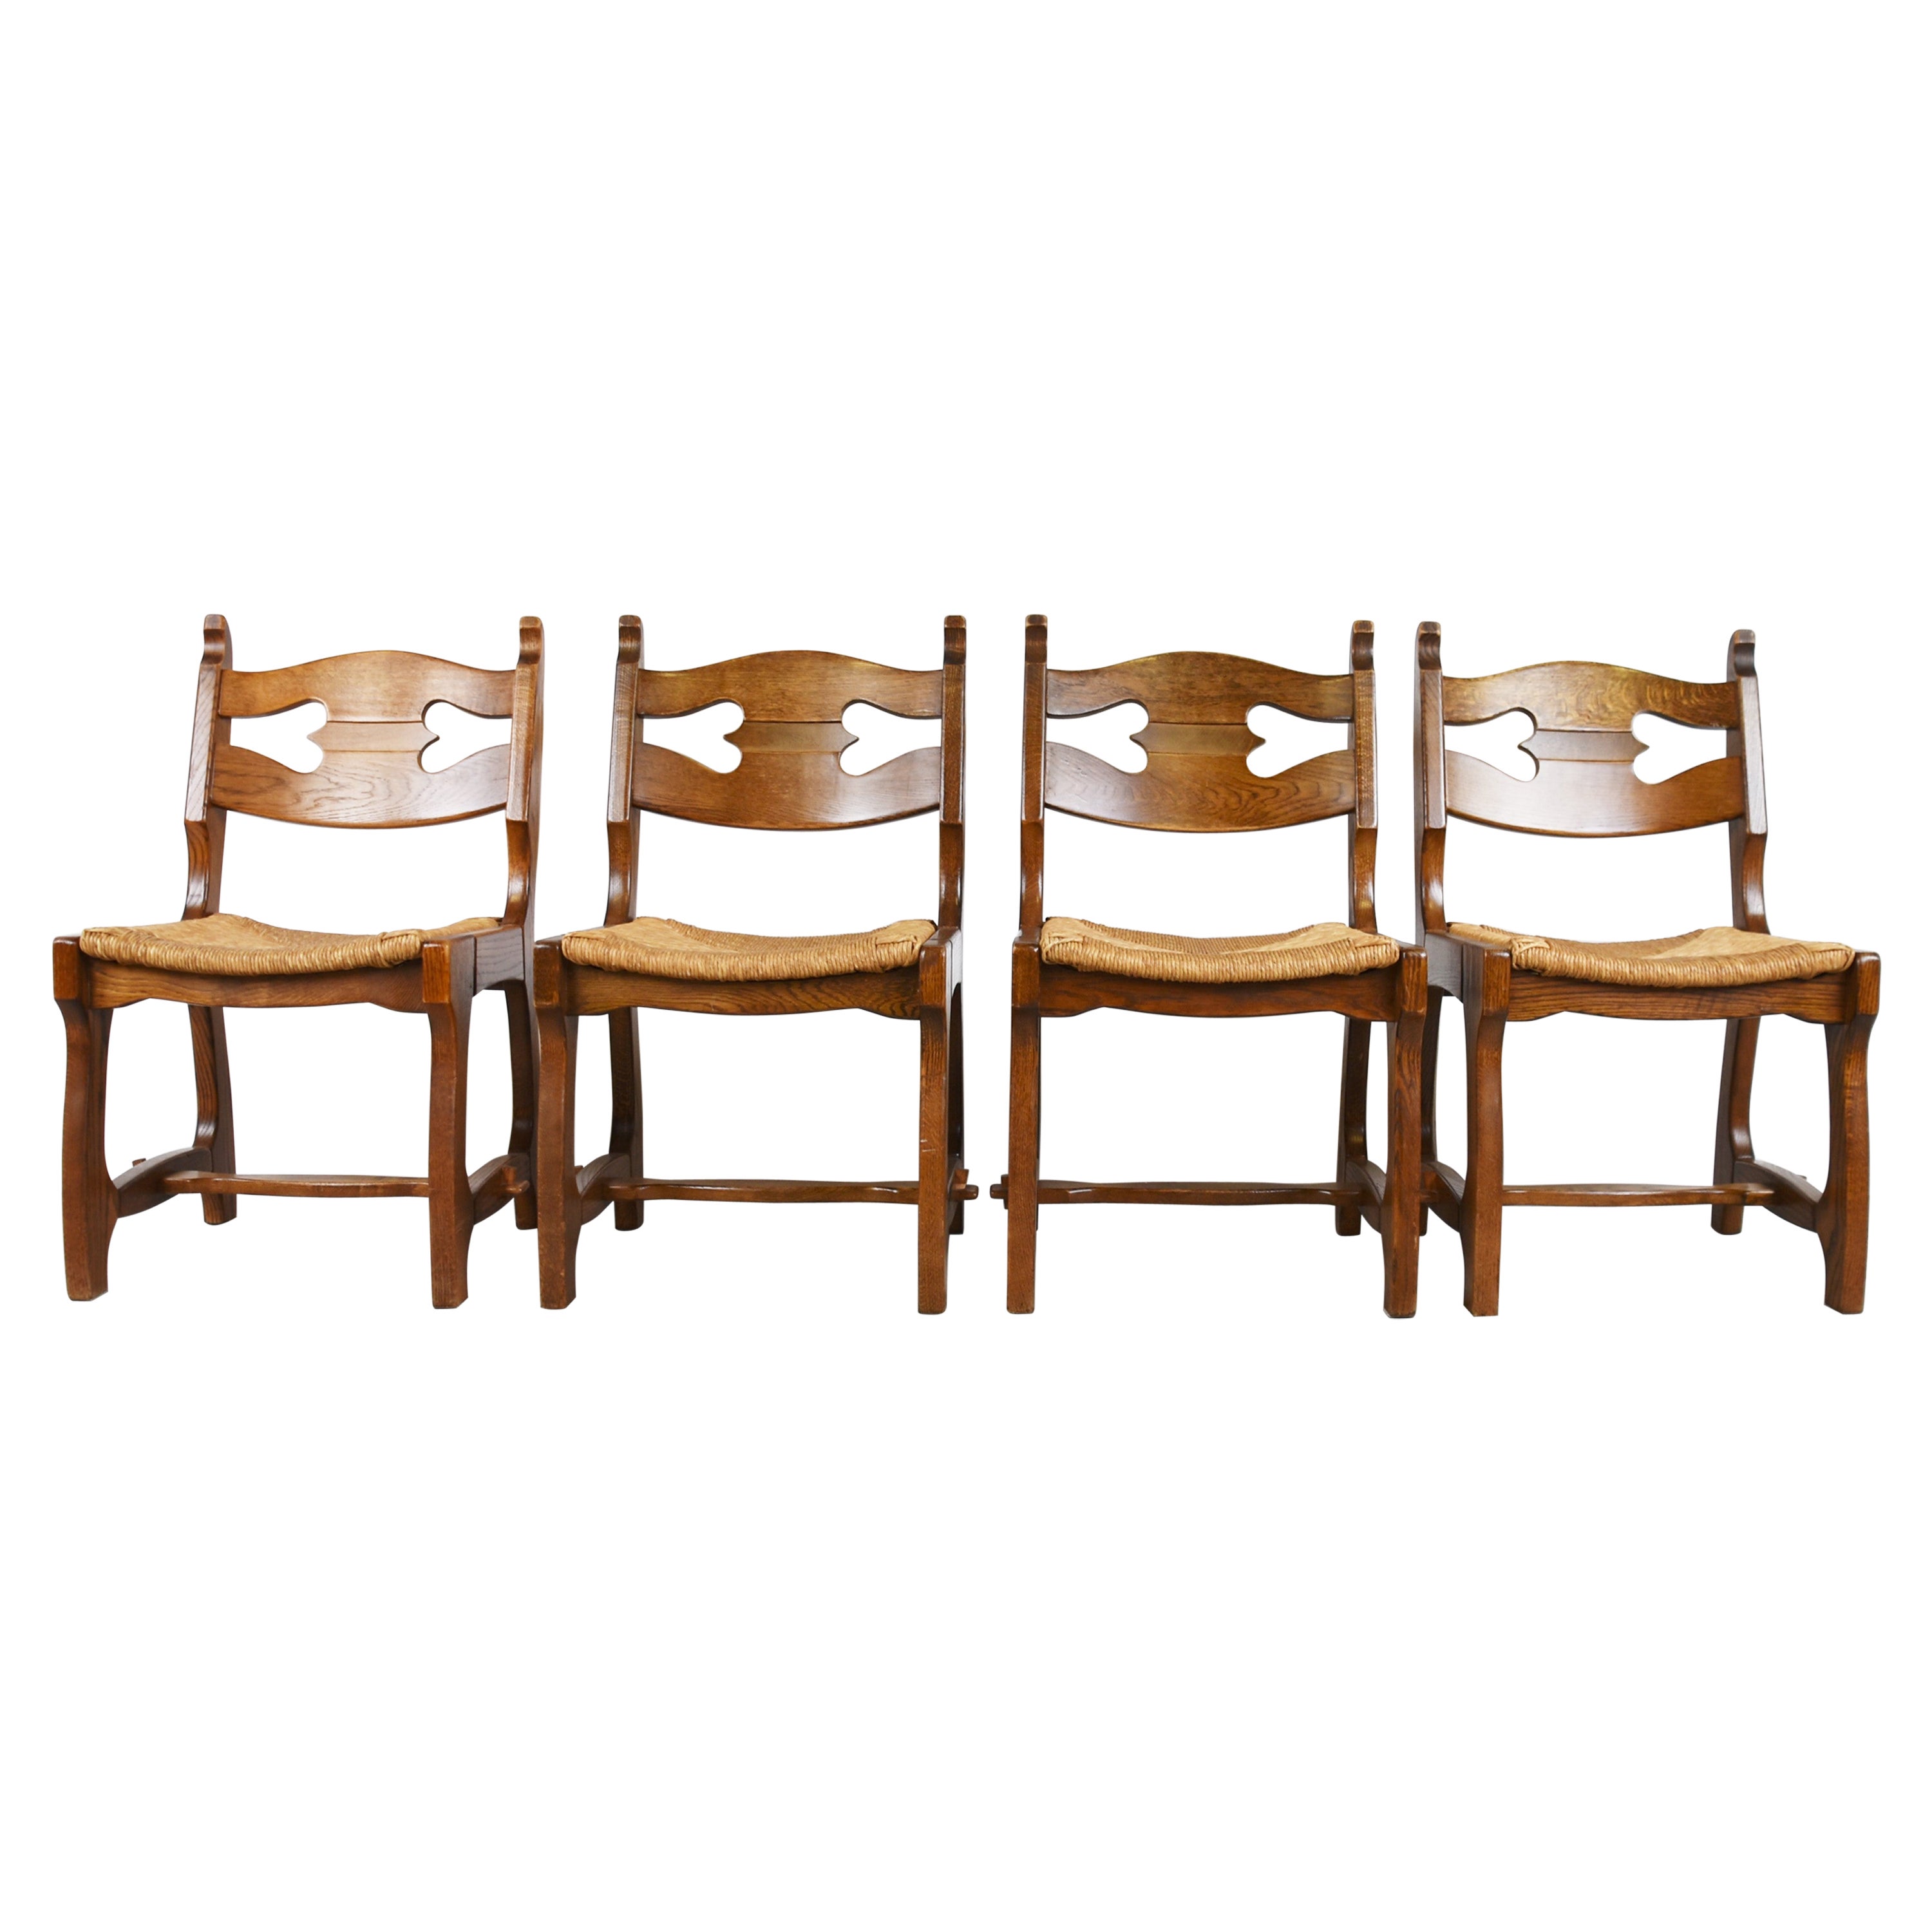 Vintage Oak and Wicker Brutalist Dining Chairs, 1960s For Sale